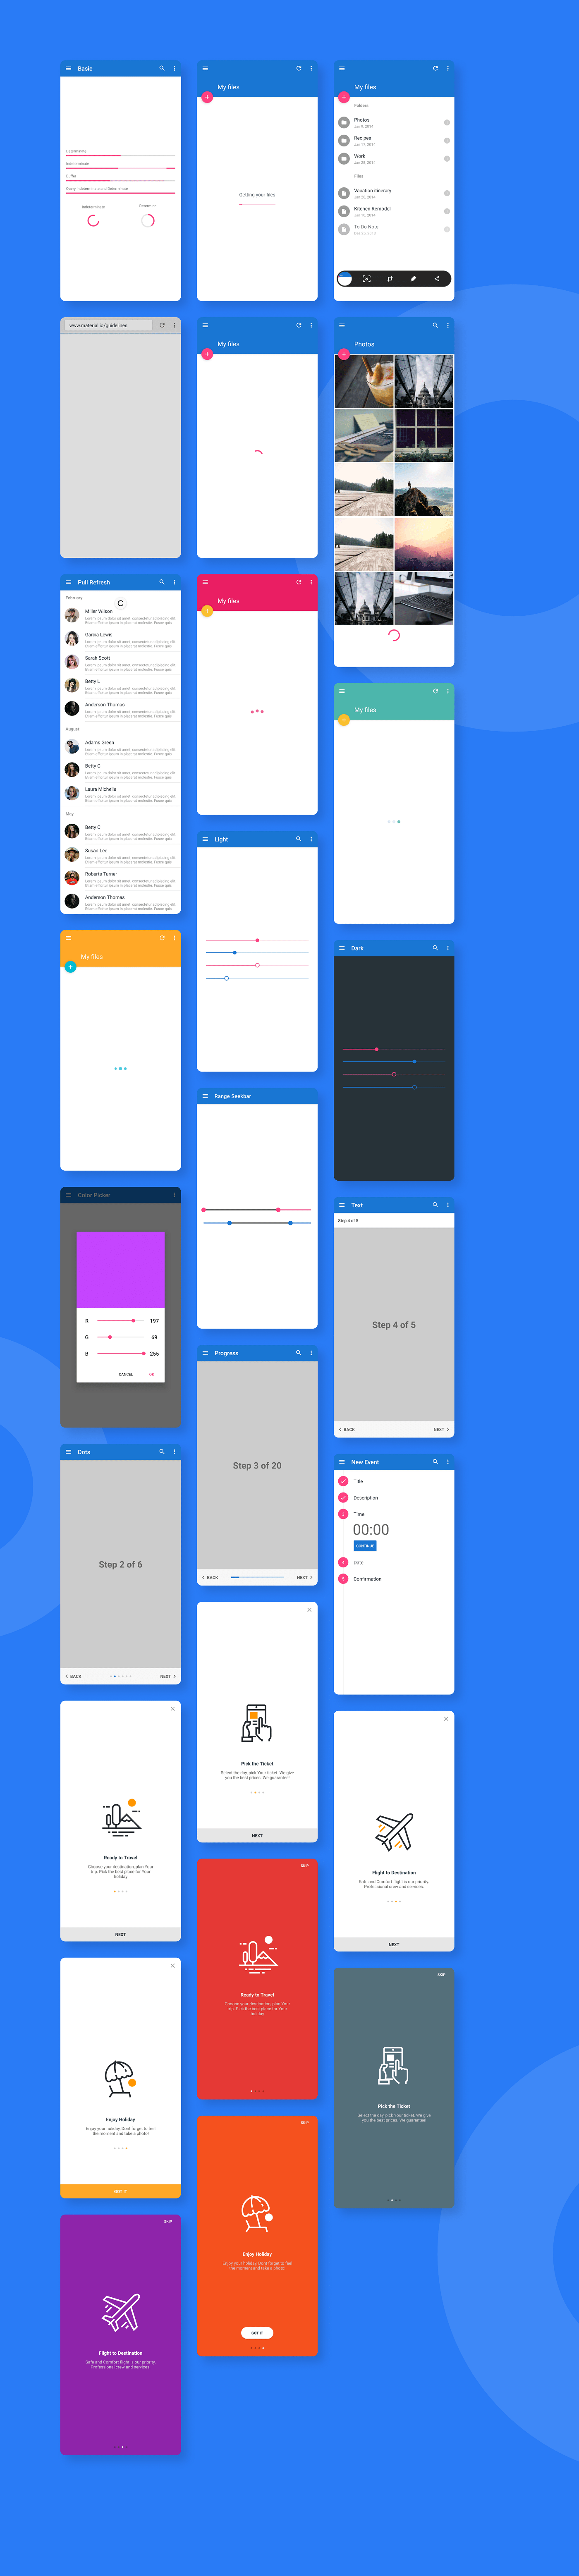 MaterialX - Android Material Design UI Components 2.7 - 20